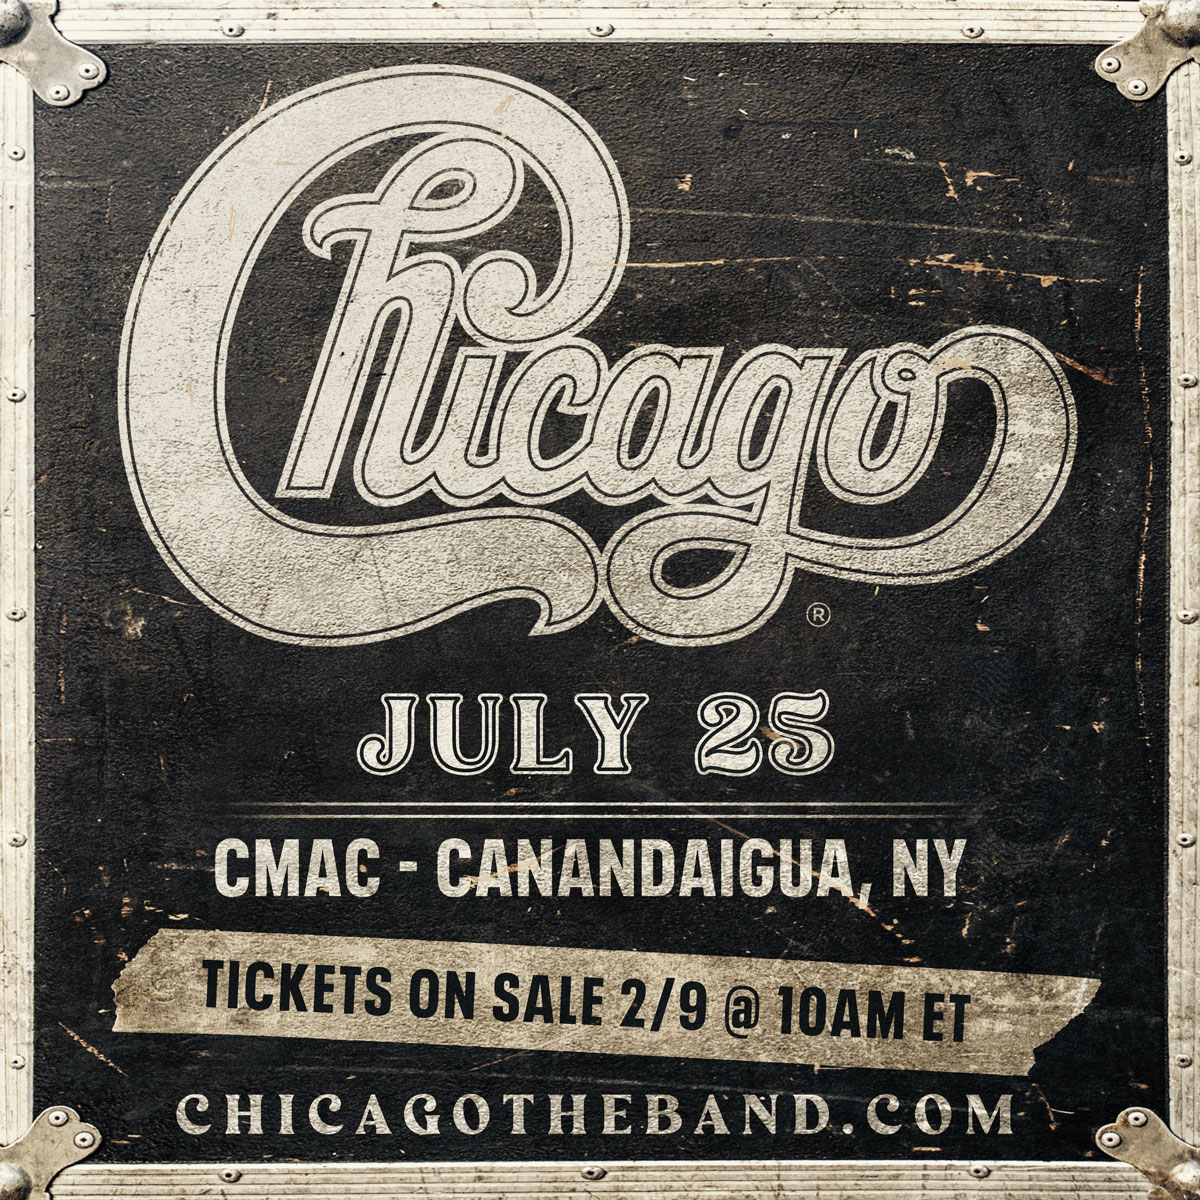 🚨 Just Announced! Chicago is coming to CMAC in #Canadaigua, NY on July 25th! Fan Club Pre-sale begins February 6th at 10am ET – Tickets on sale February 9th at 10am ET. 🎶🎺